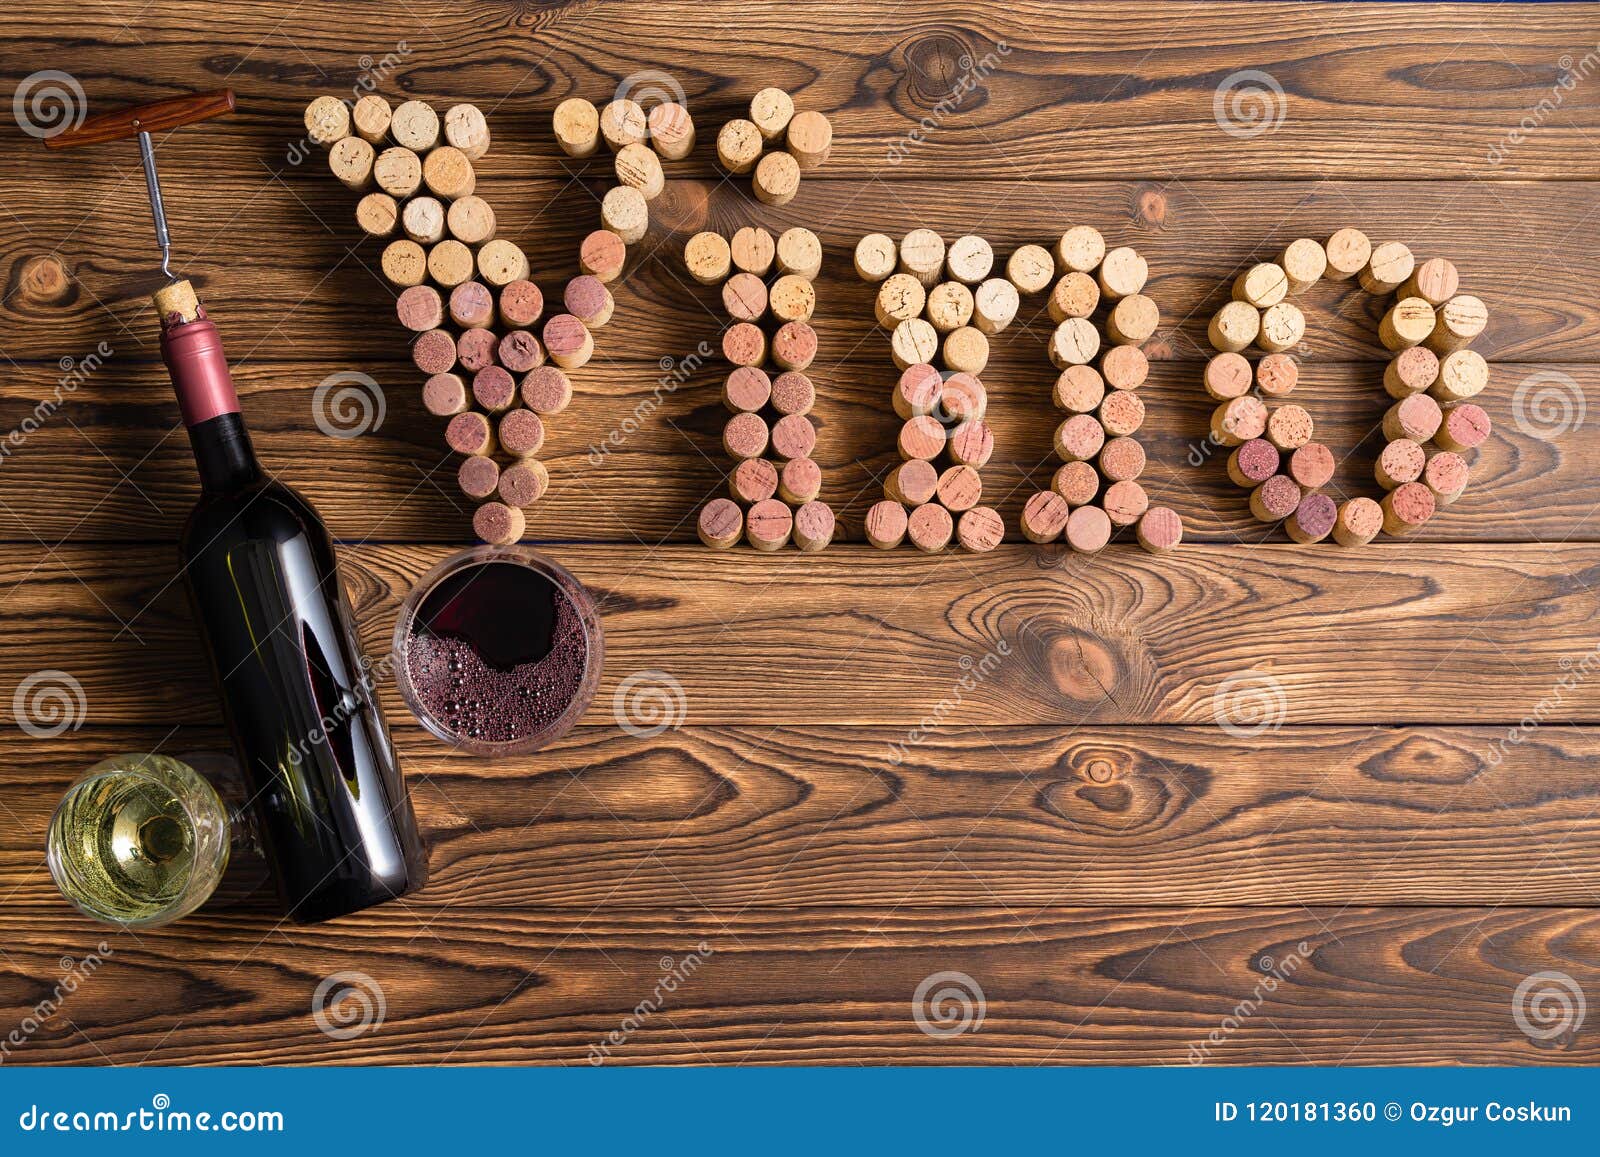 vino lettering made of corks on wooden background